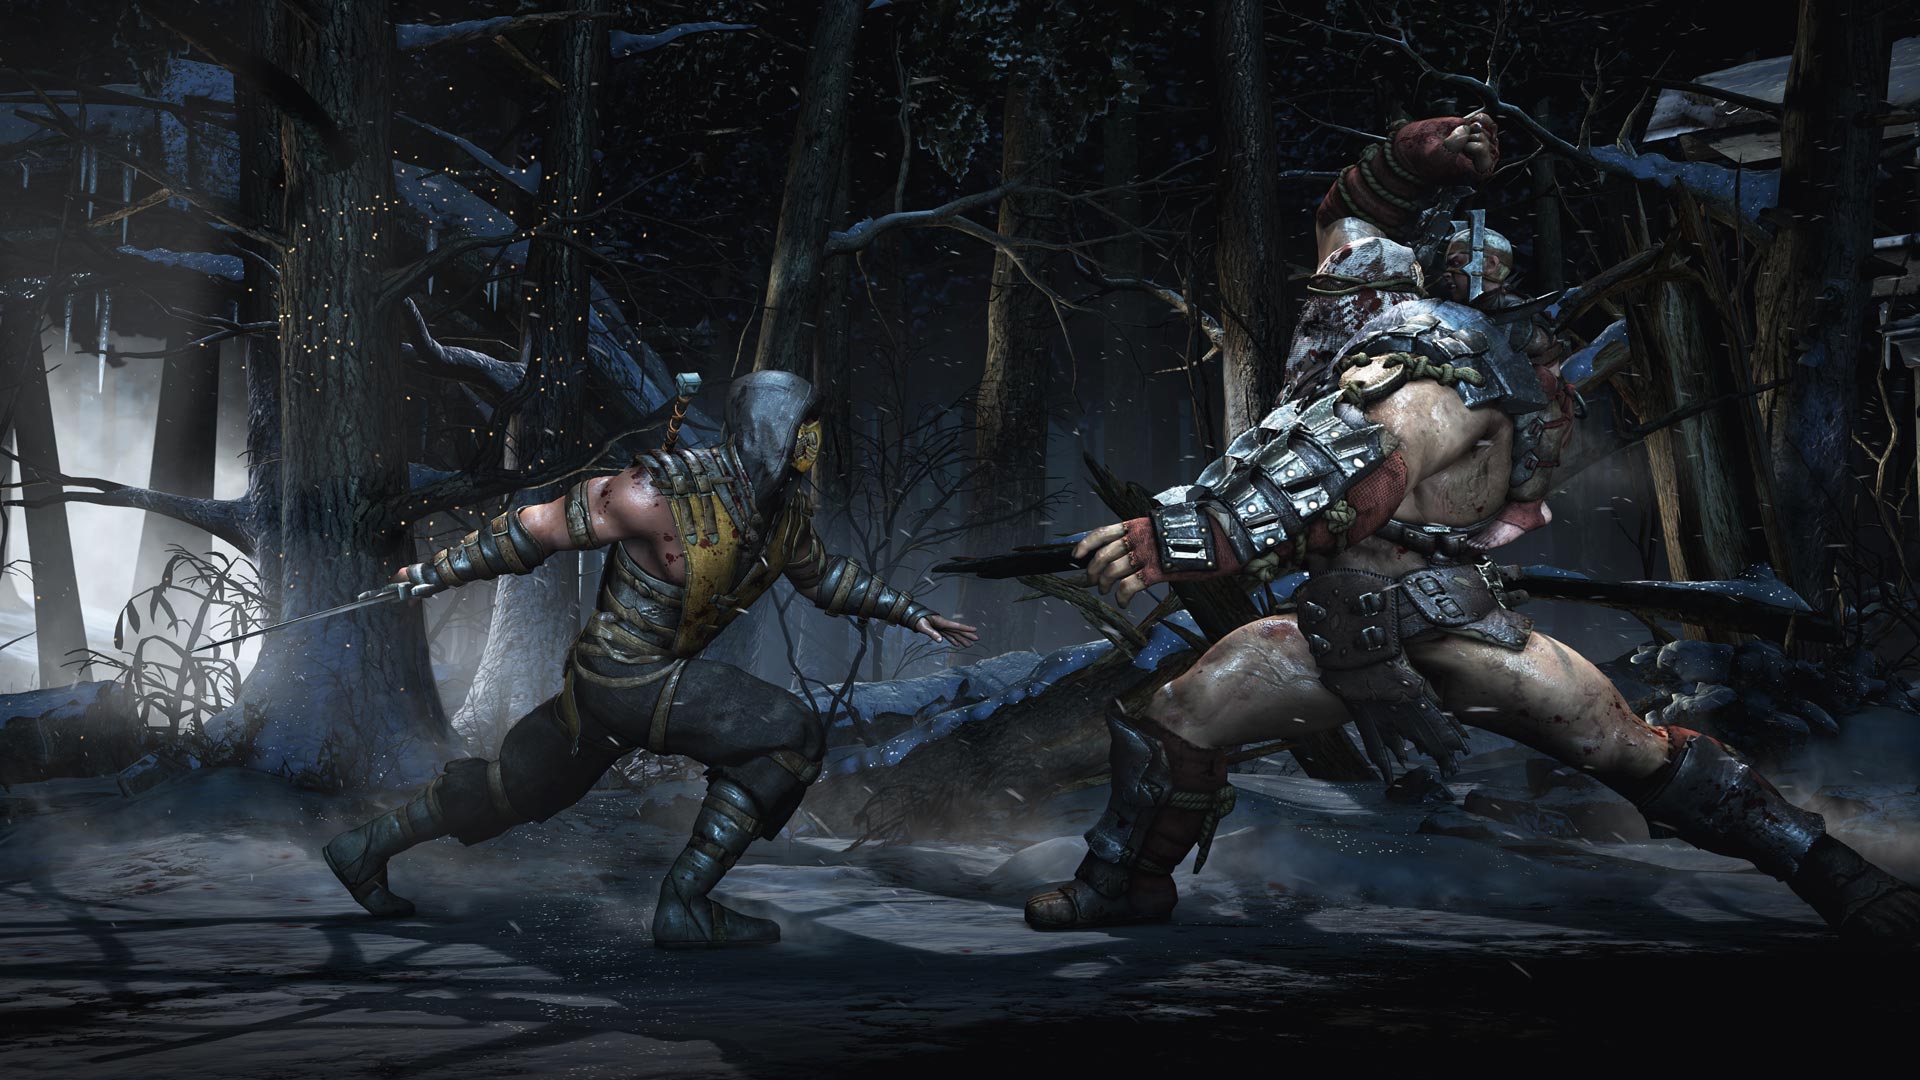 Mortal kombat x online play Guide for